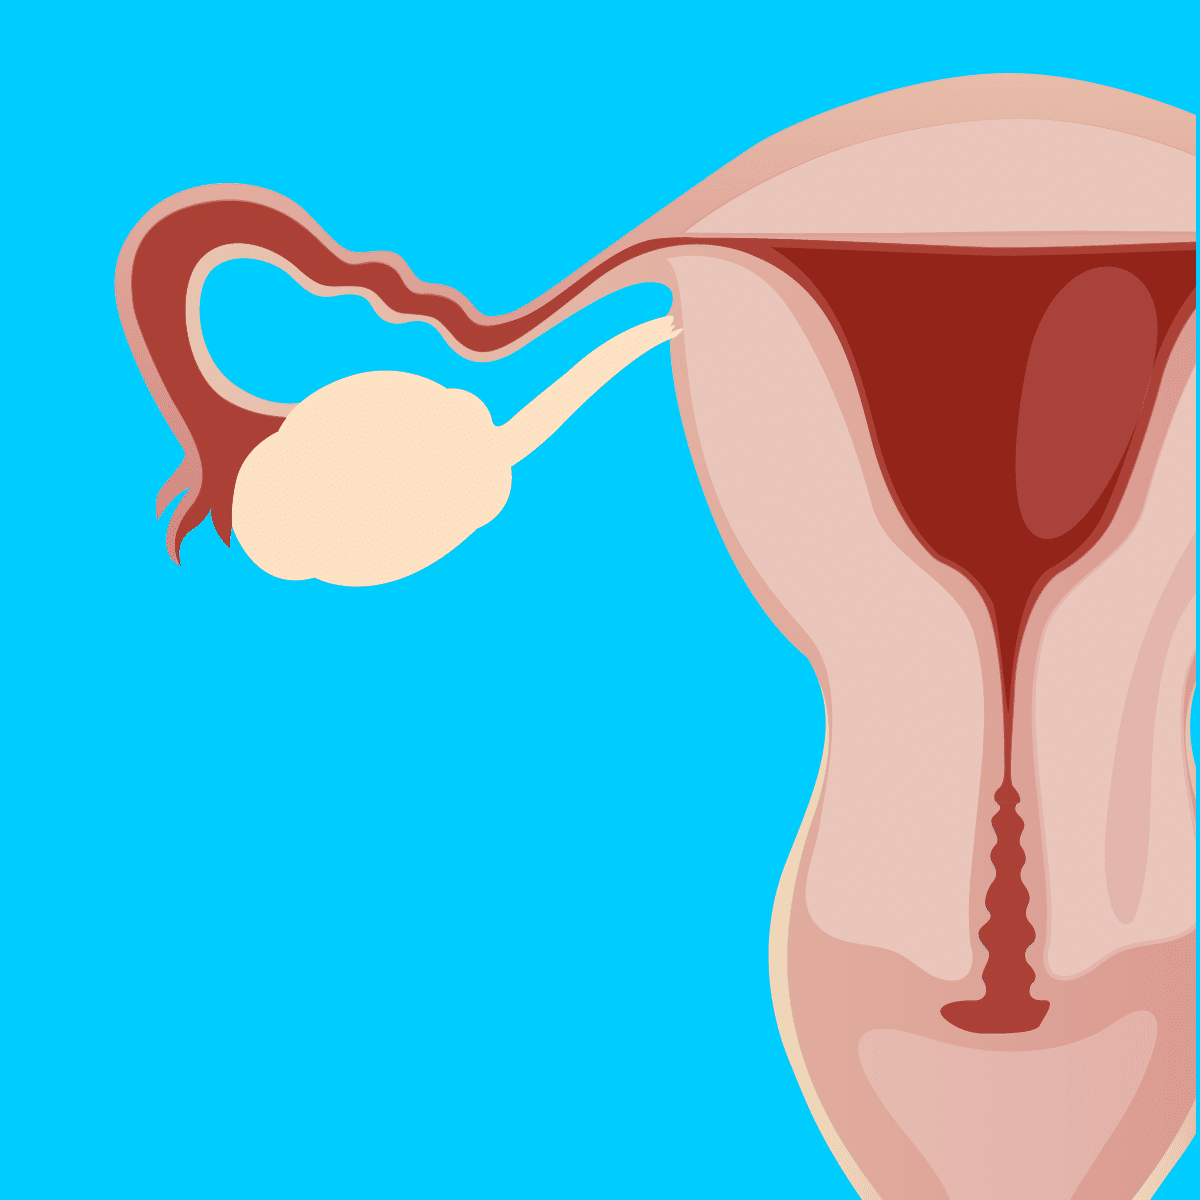 A 'One-Two Punch' to Wipe Out Cancerous Ovarian Cells